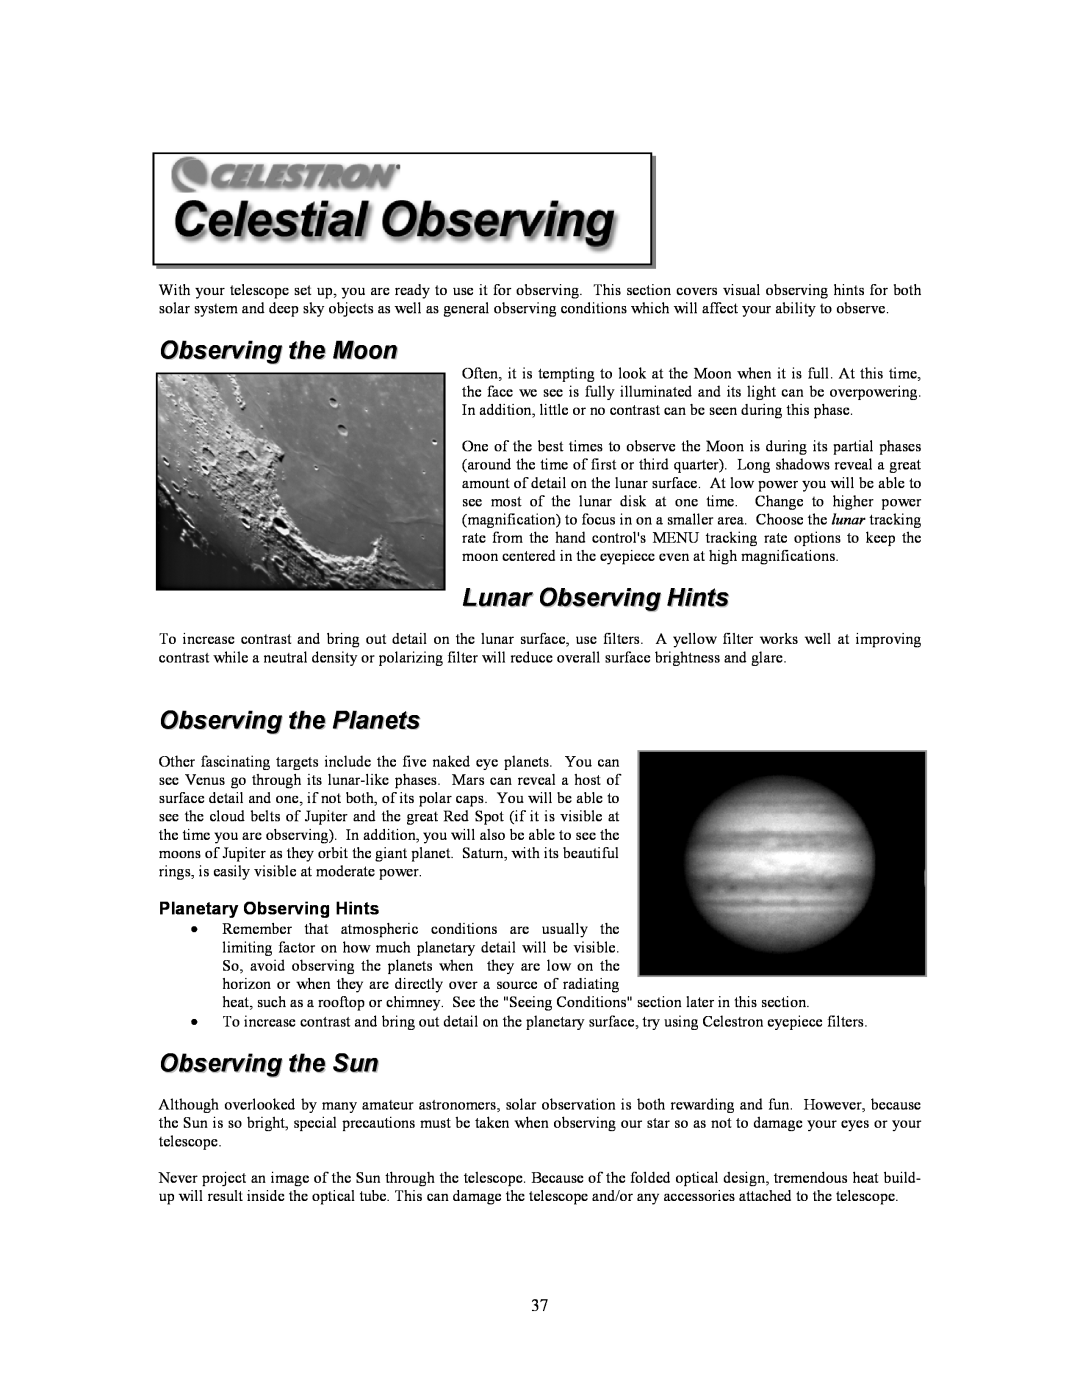 Celestron C8-NGT, C10-N manual Observing the Moon, Lunar Observing Hints, Observing the Planets, Observing the Sun 